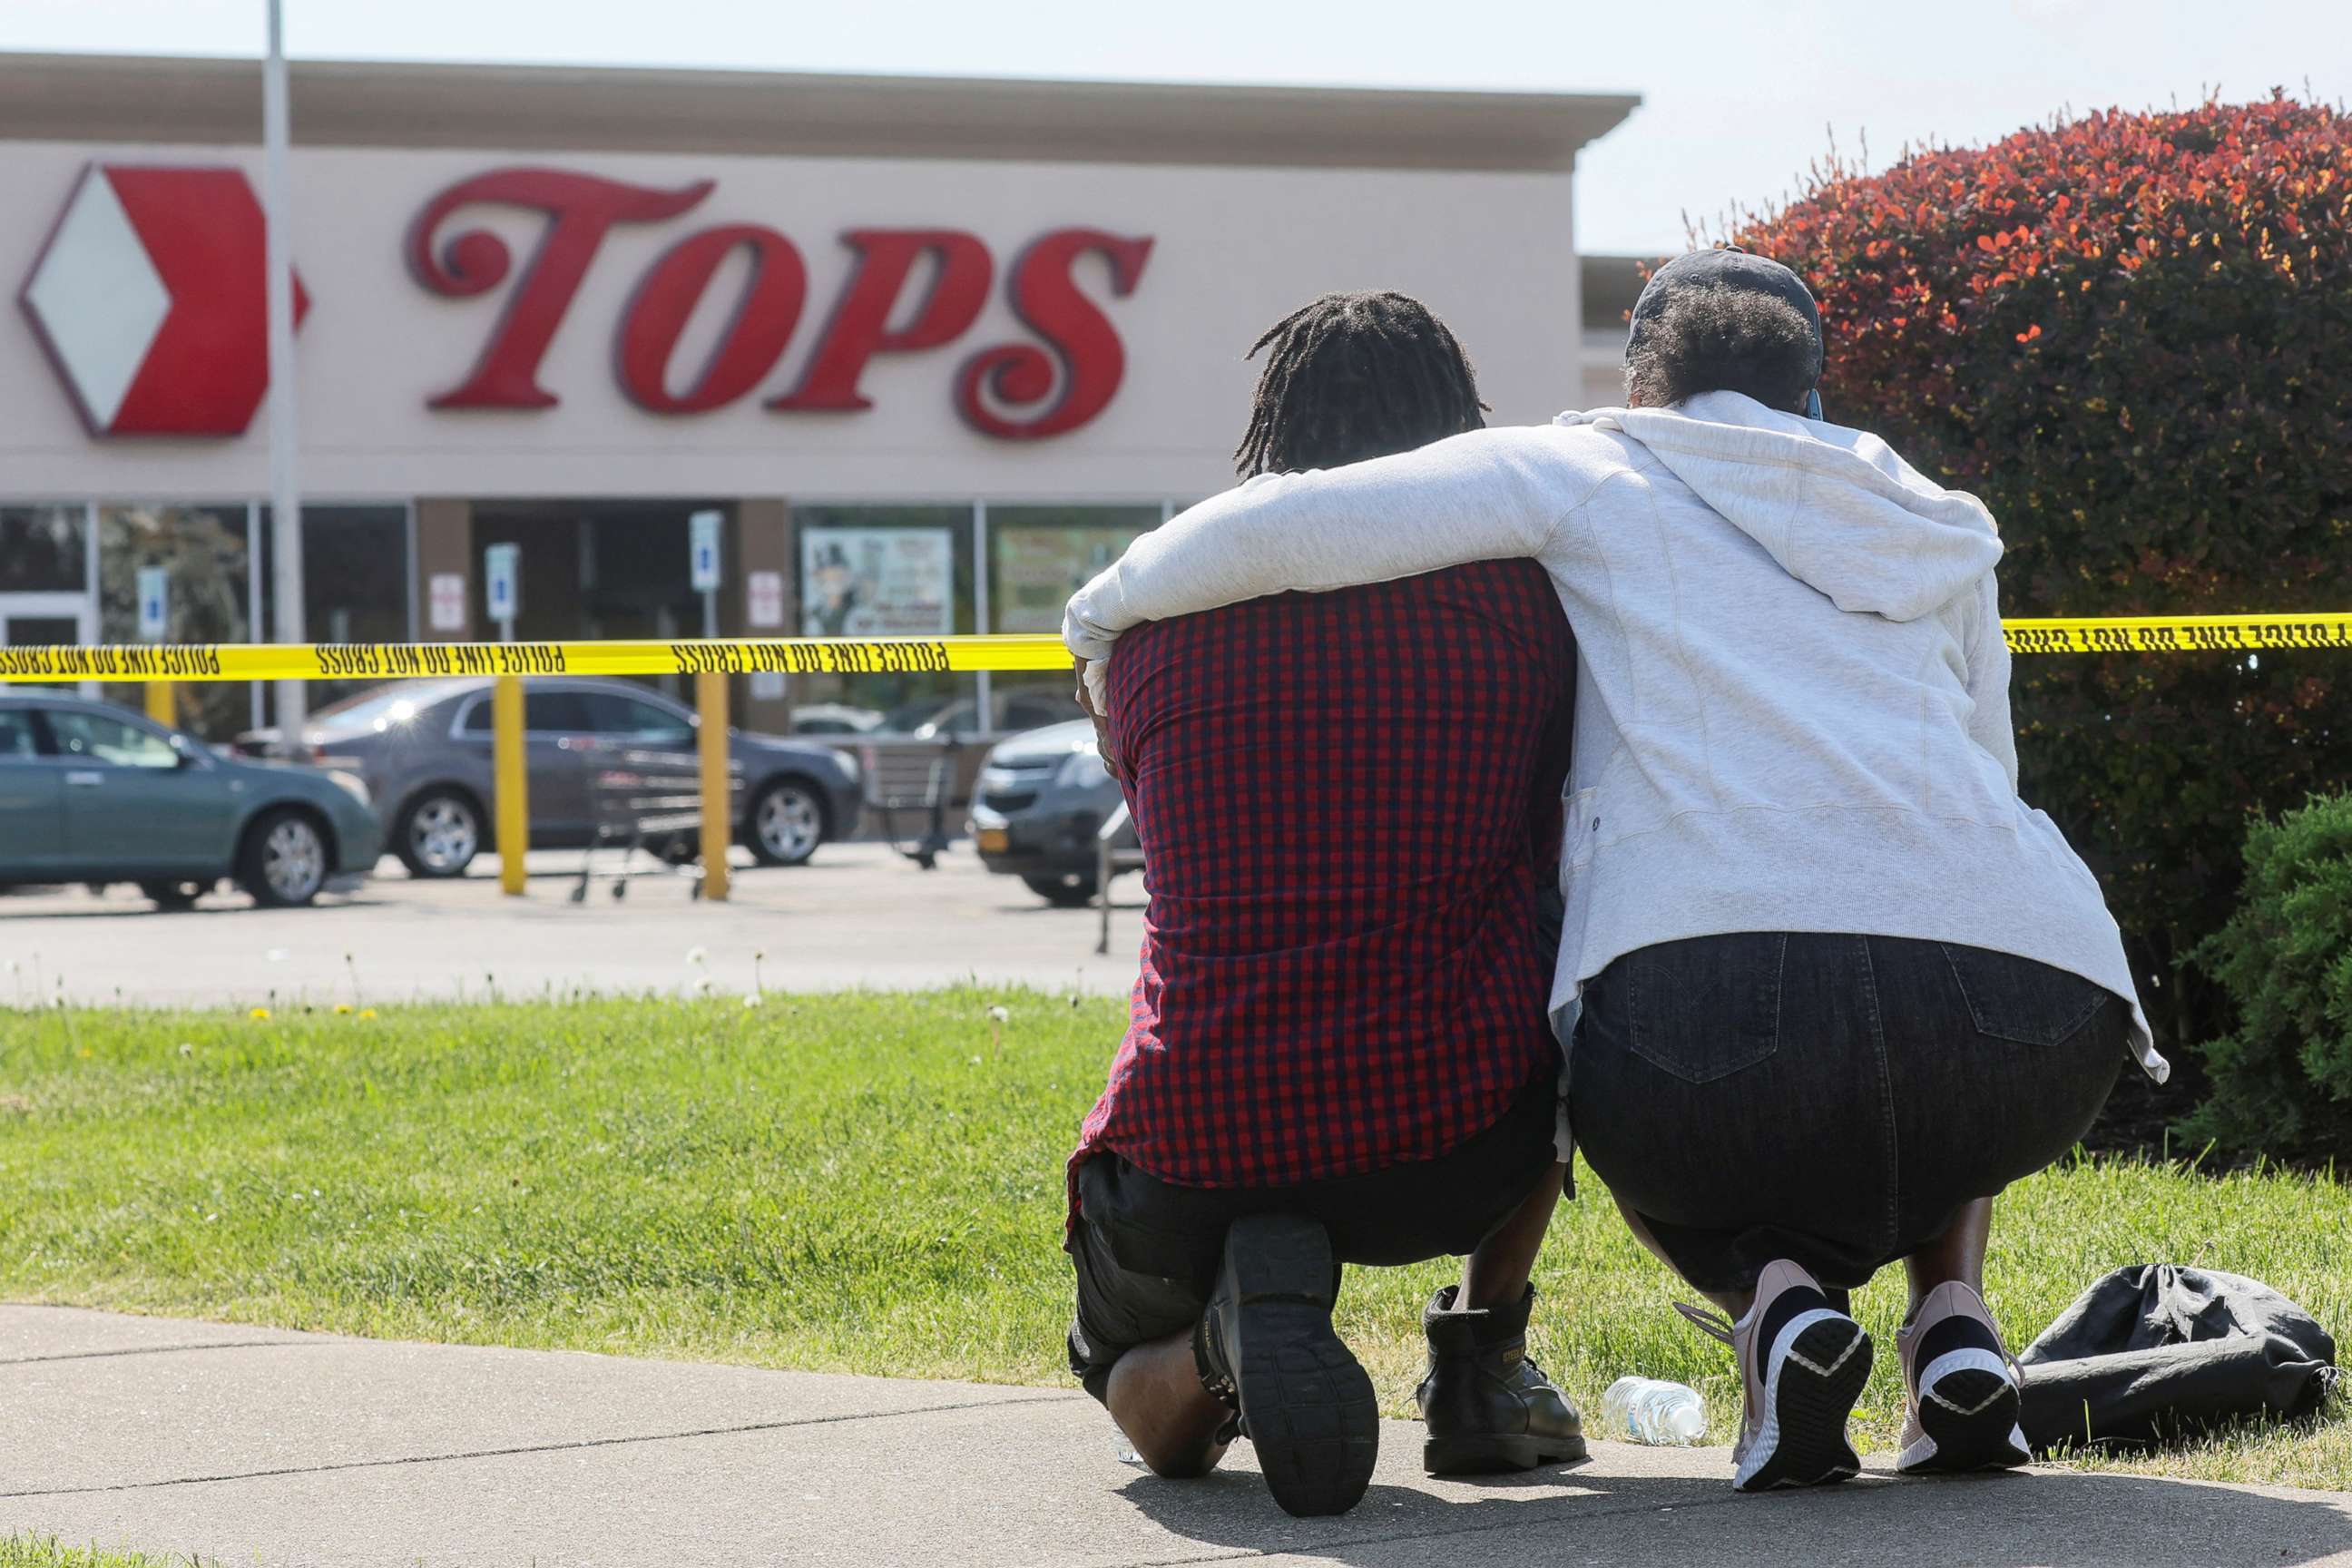 PHOTO: Mourners react while attending a vigil for victims of the shooting at a TOPS supermarket in Buffalo, NY, May 15, 2022.